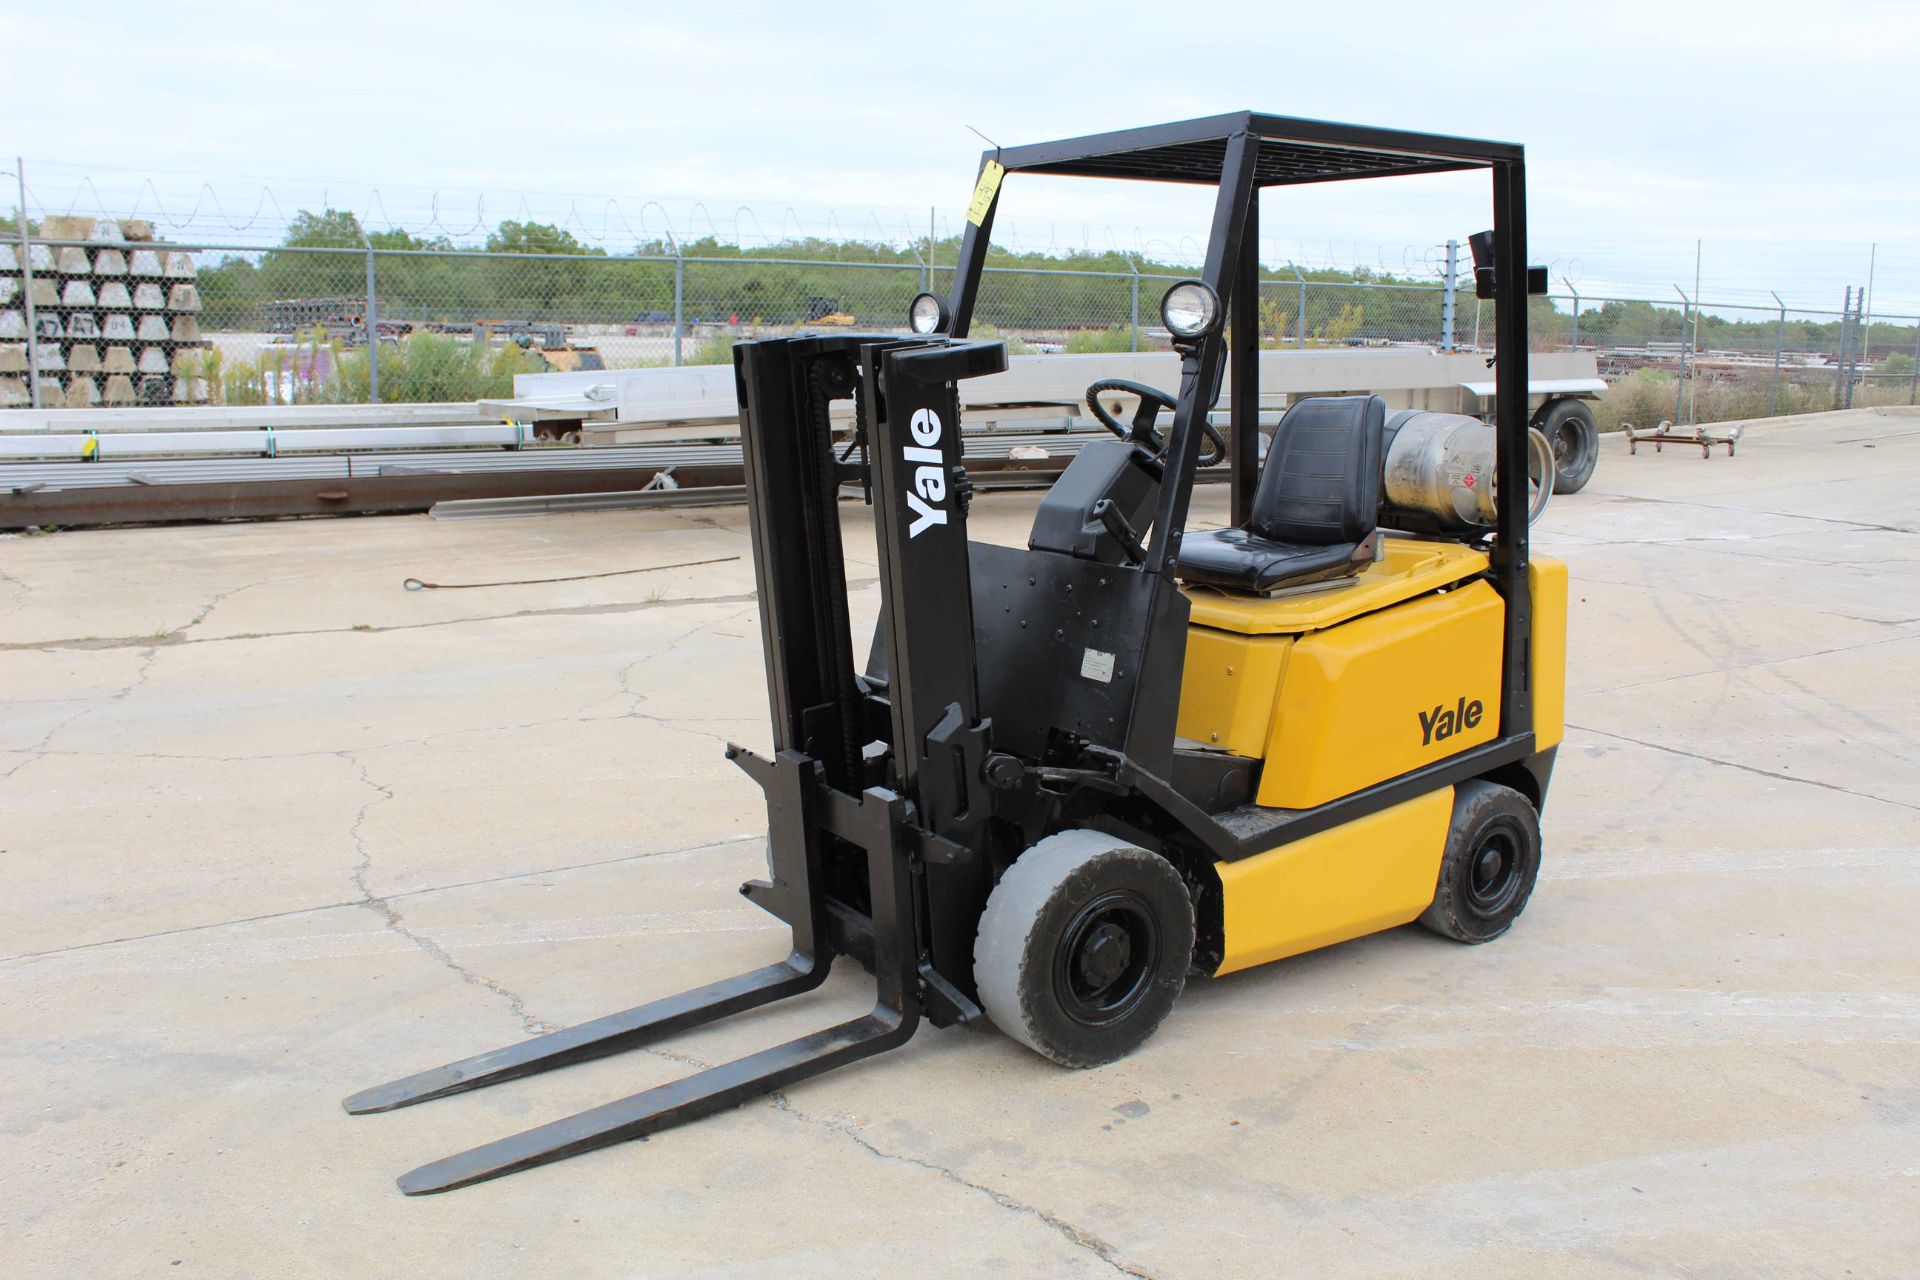 FORKLIFT, YALE 3,000 LB. CAP. MDL. GLP030, new 2000, LPG engine, 83” compact style mast, pneu. style - Image 3 of 10